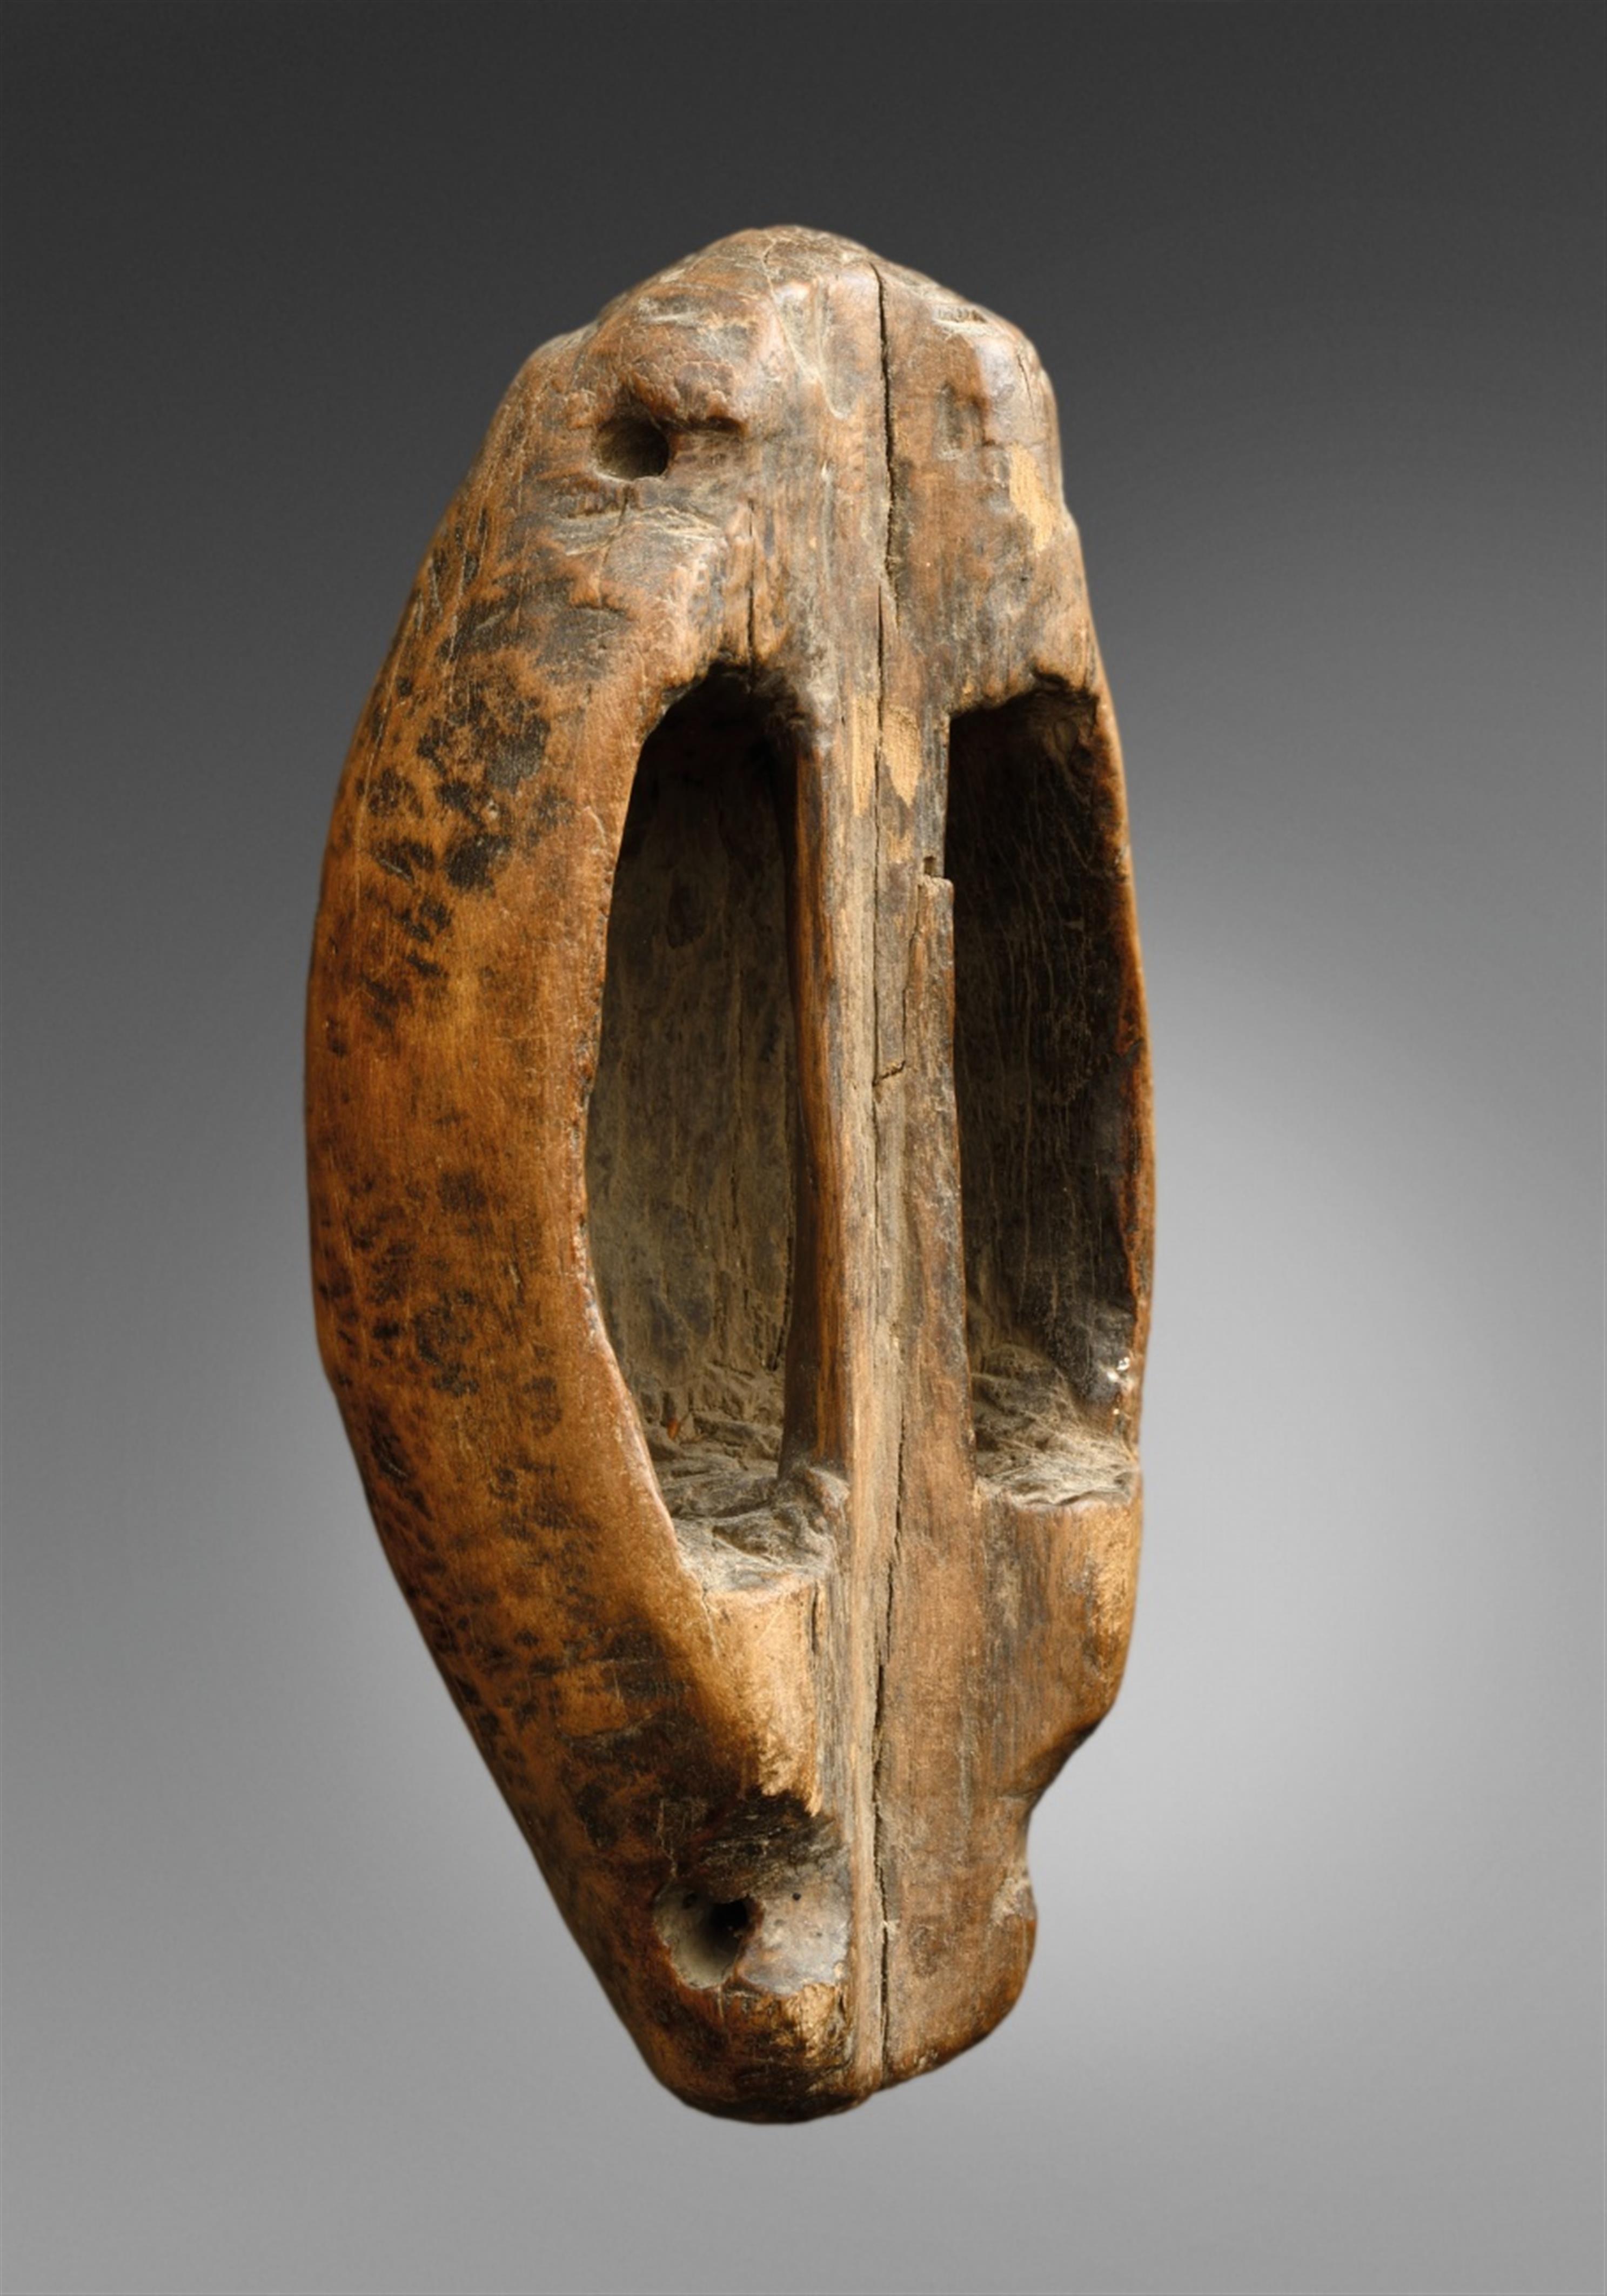 TWO SUDAN SHIELDS A Shilluk shield of cylindrical form tapering at each end, covered in hide, carved grip; and a Dinka shield, of ovoid form with carved grip, dark patina. - image-2